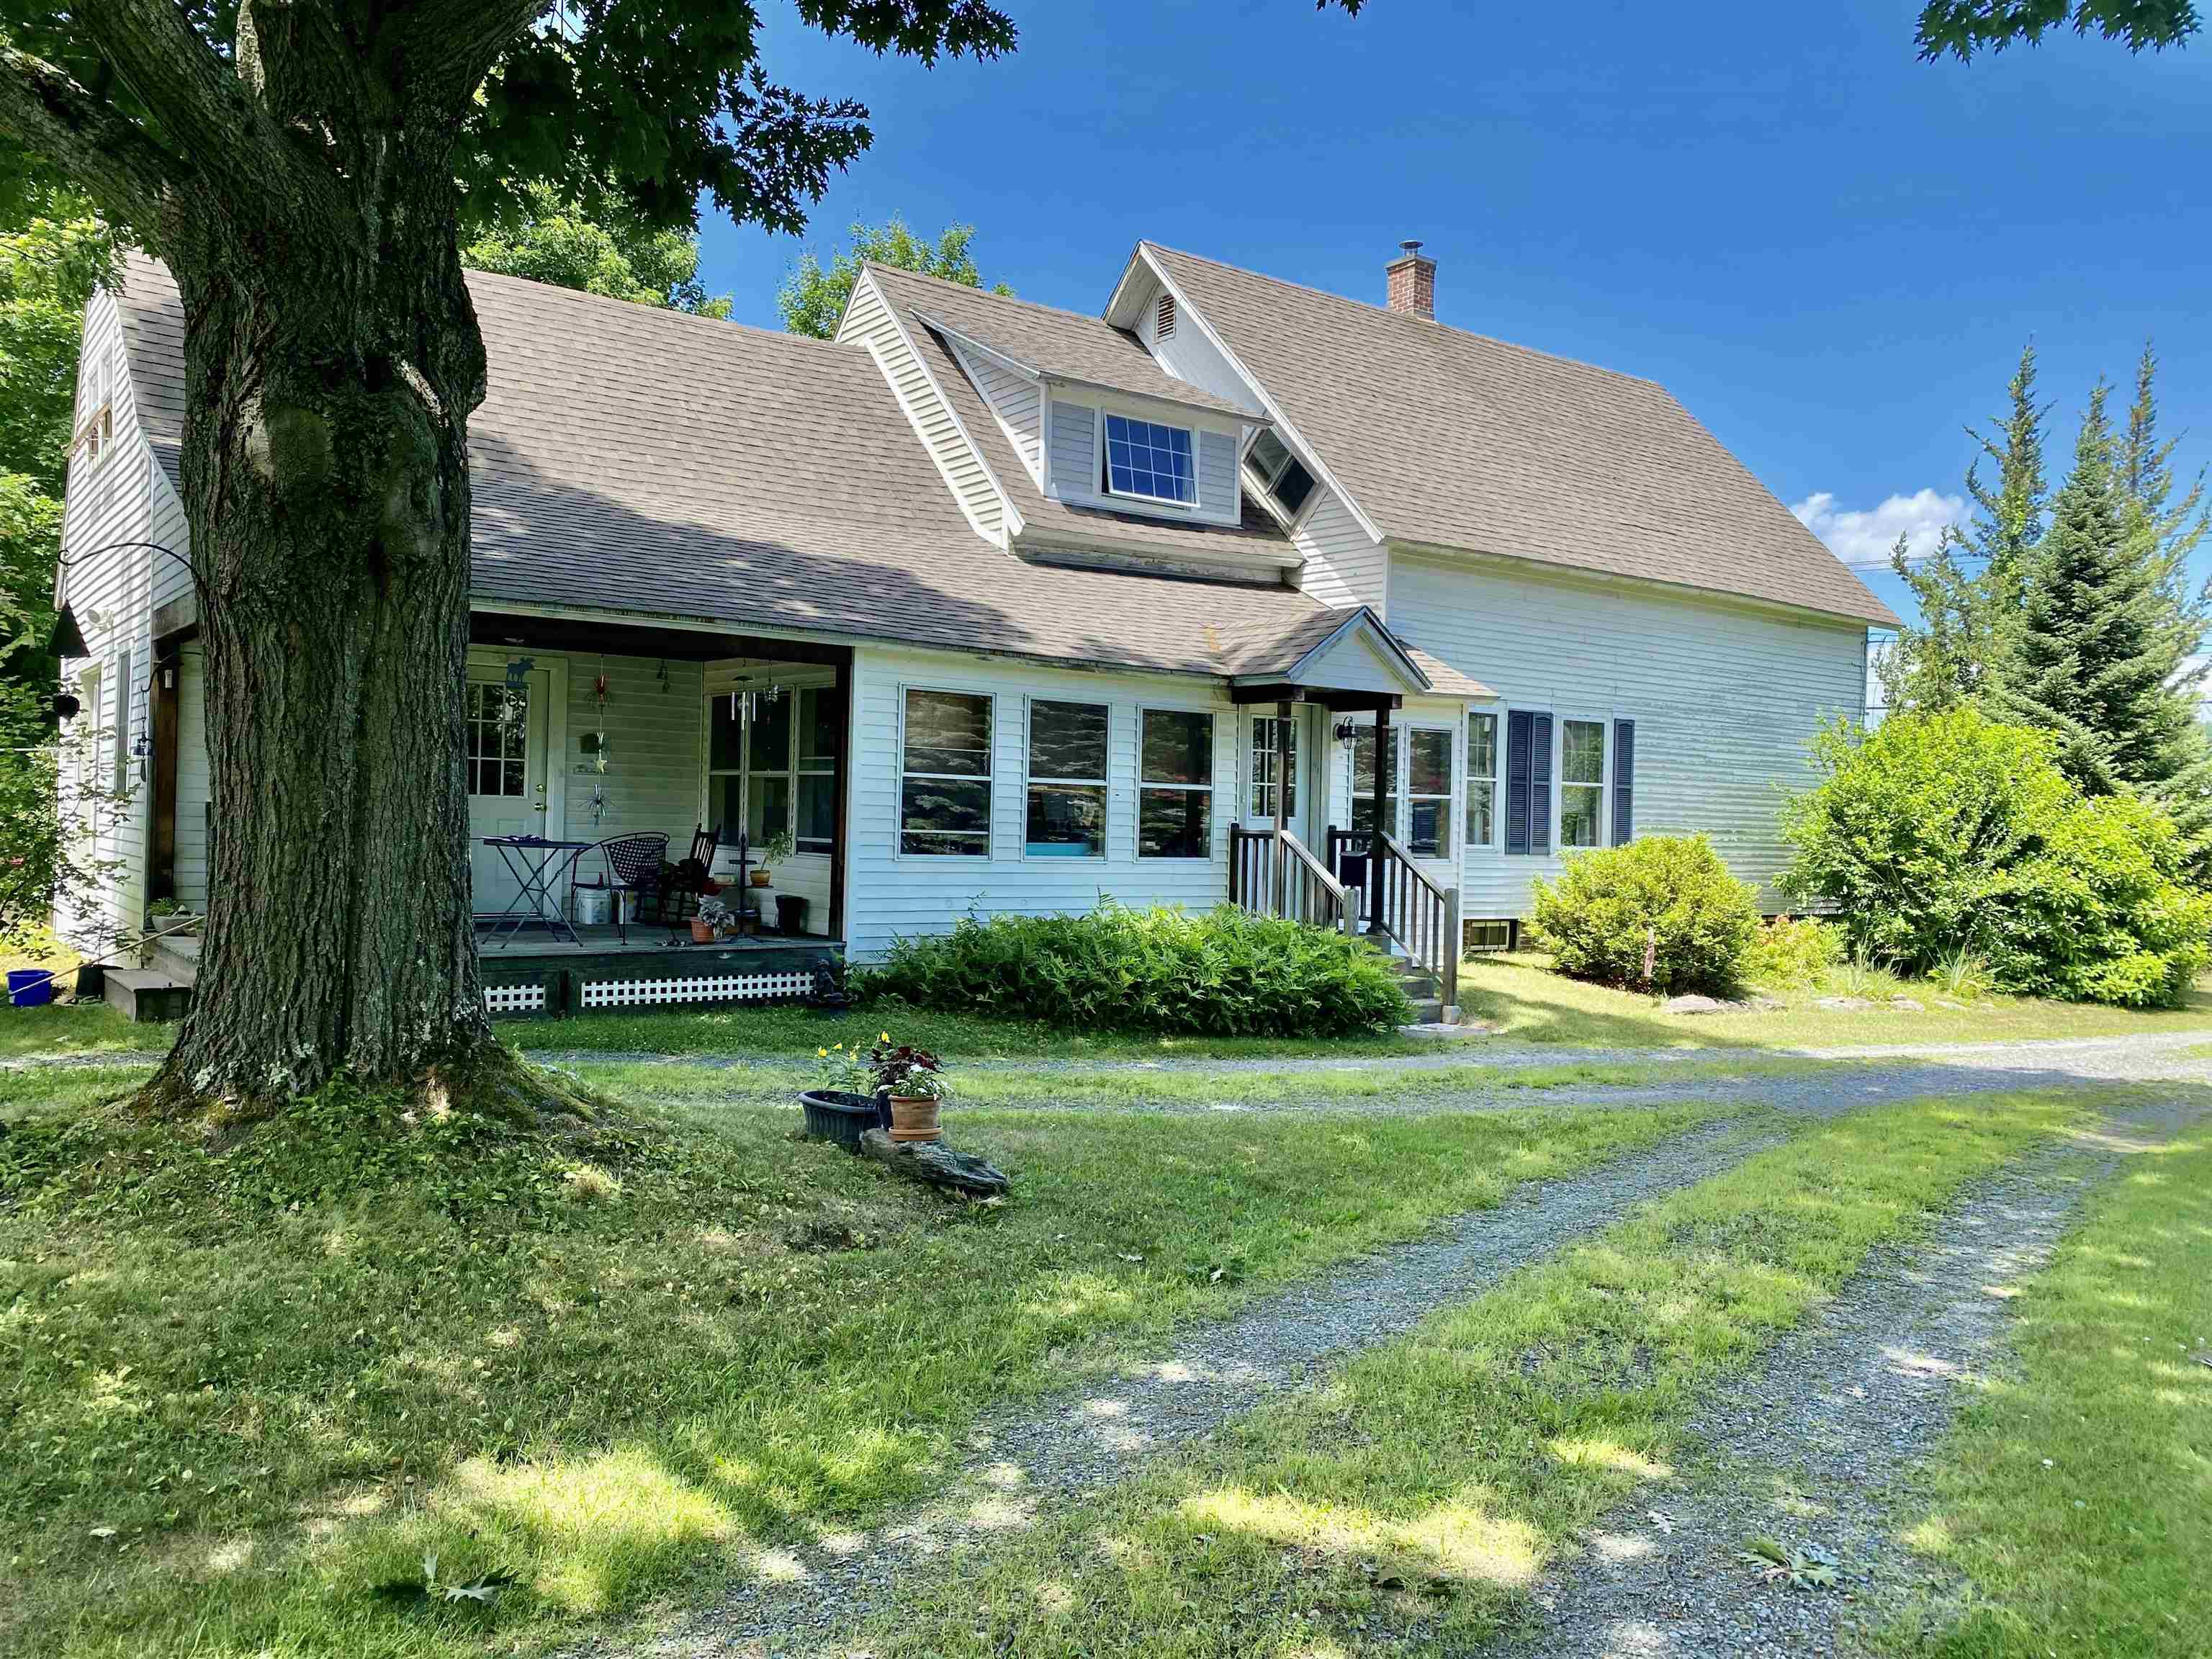 Claremont NH 03743 Home for sale $List Price is $205,000